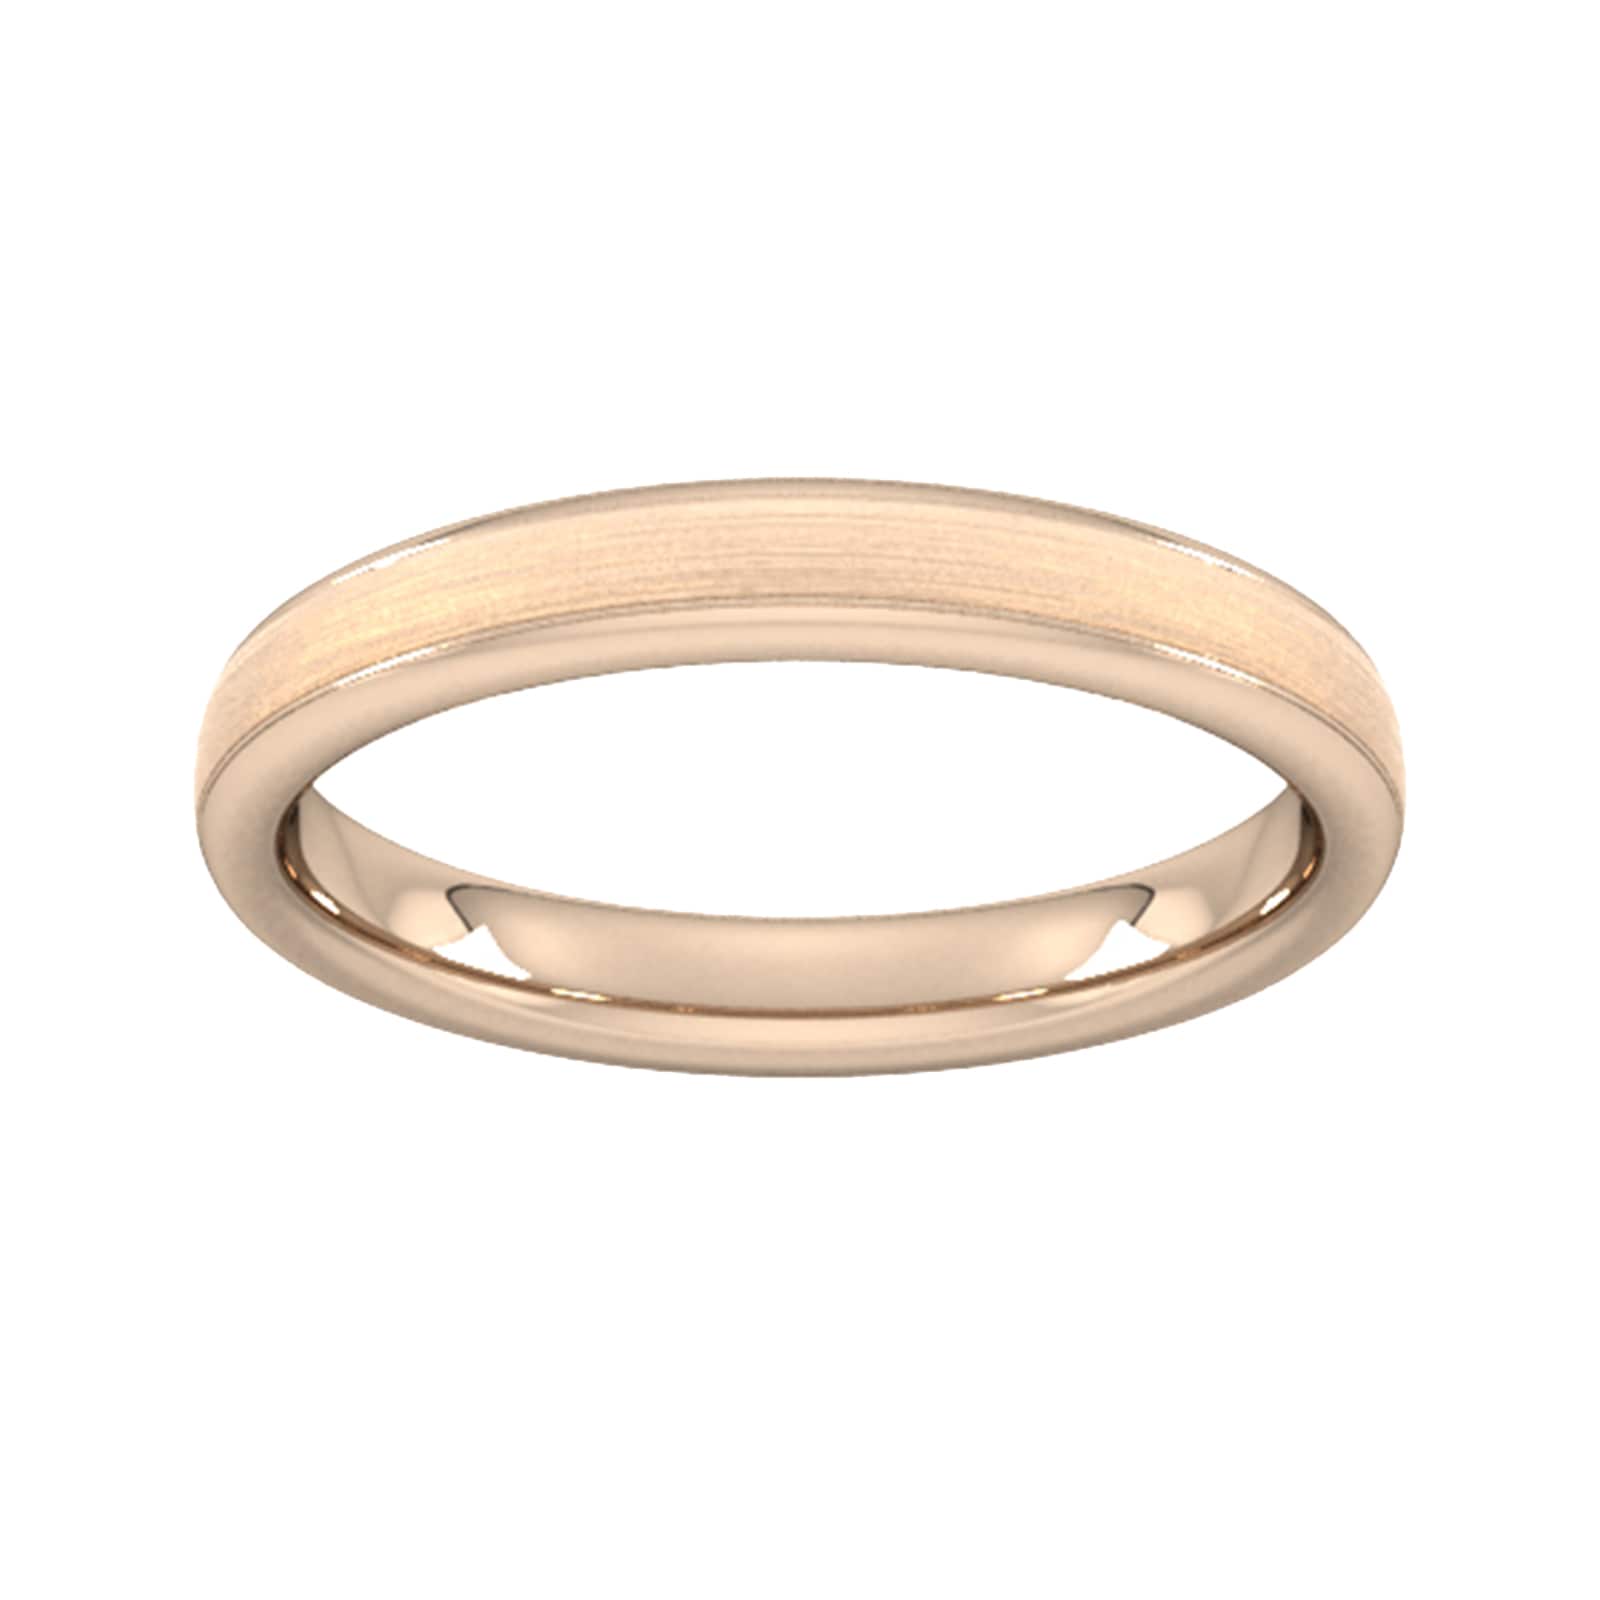 3mm Flat Court Heavy Matt Centre With Grooves Wedding Ring In 18 Carat Rose Gold - Ring Size S